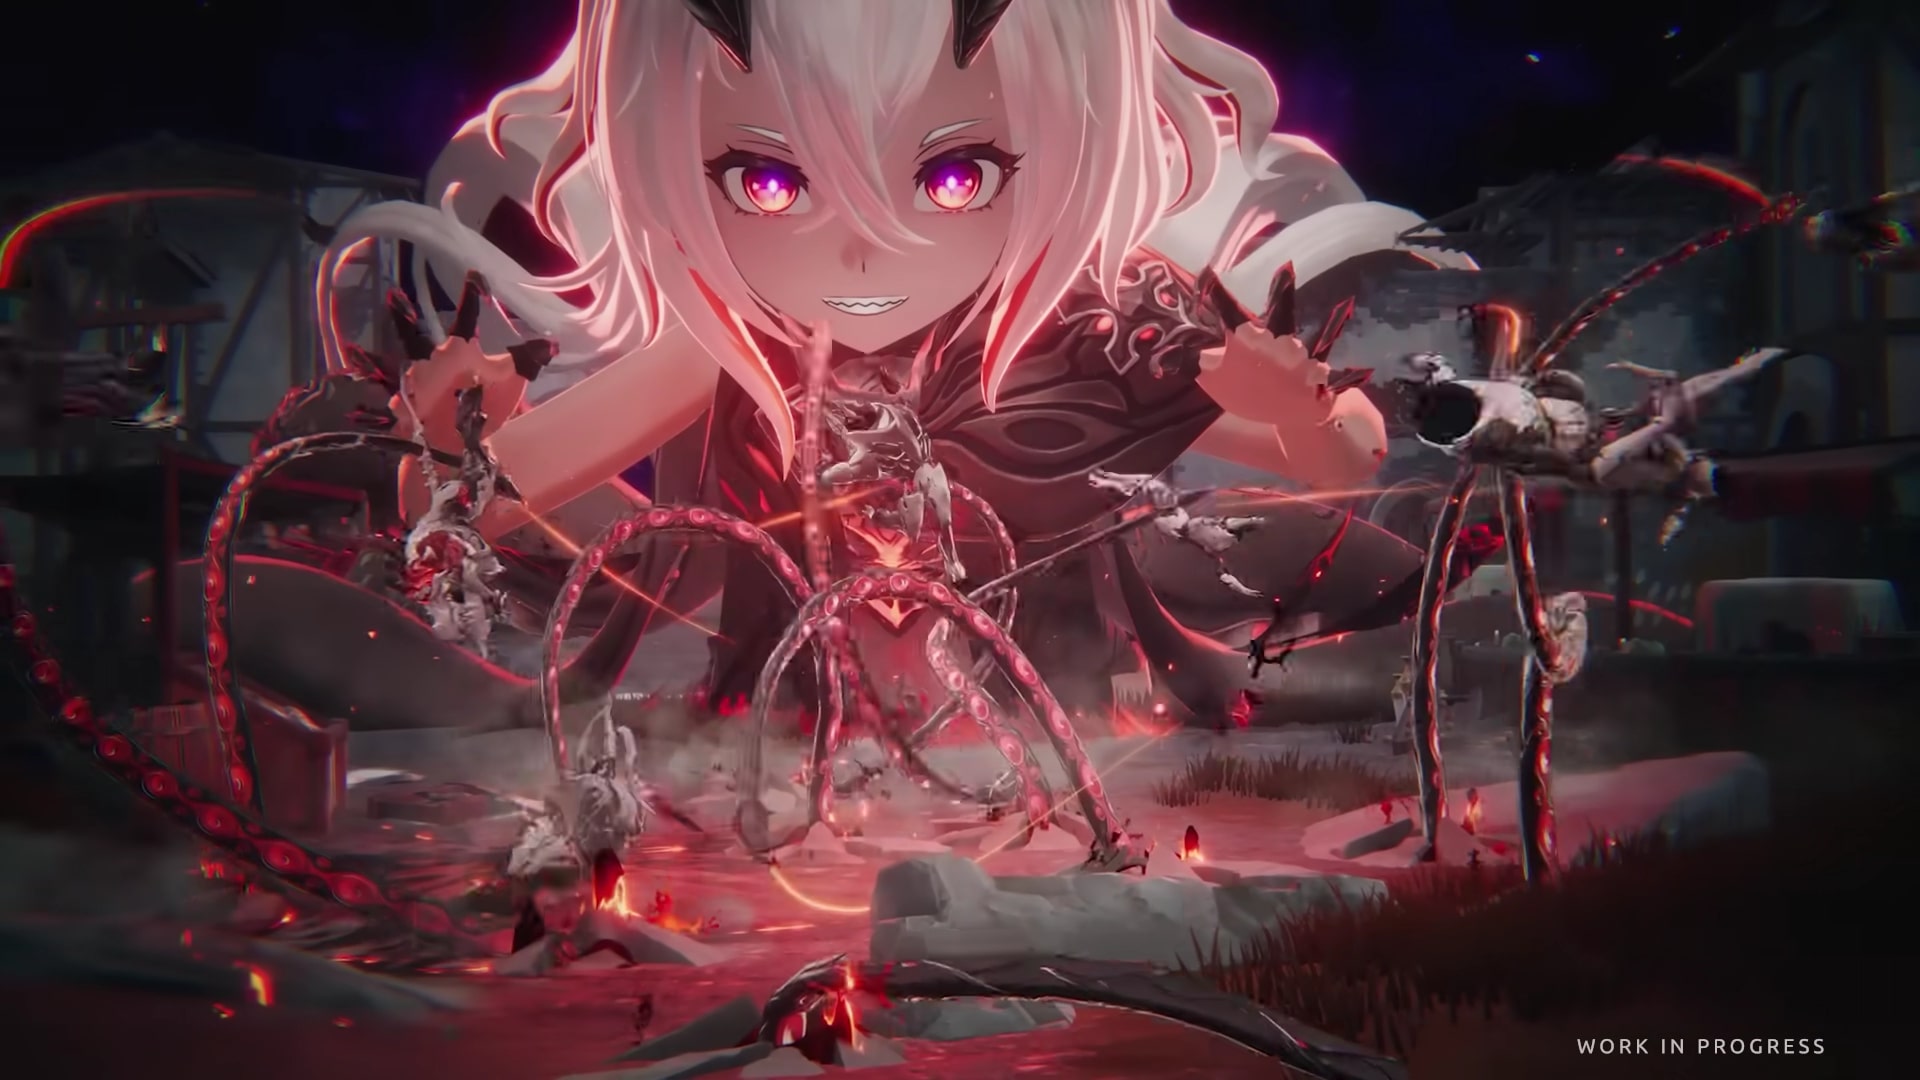 Duet Night Abyss Opens Test Runs for New Anime RPG on PC